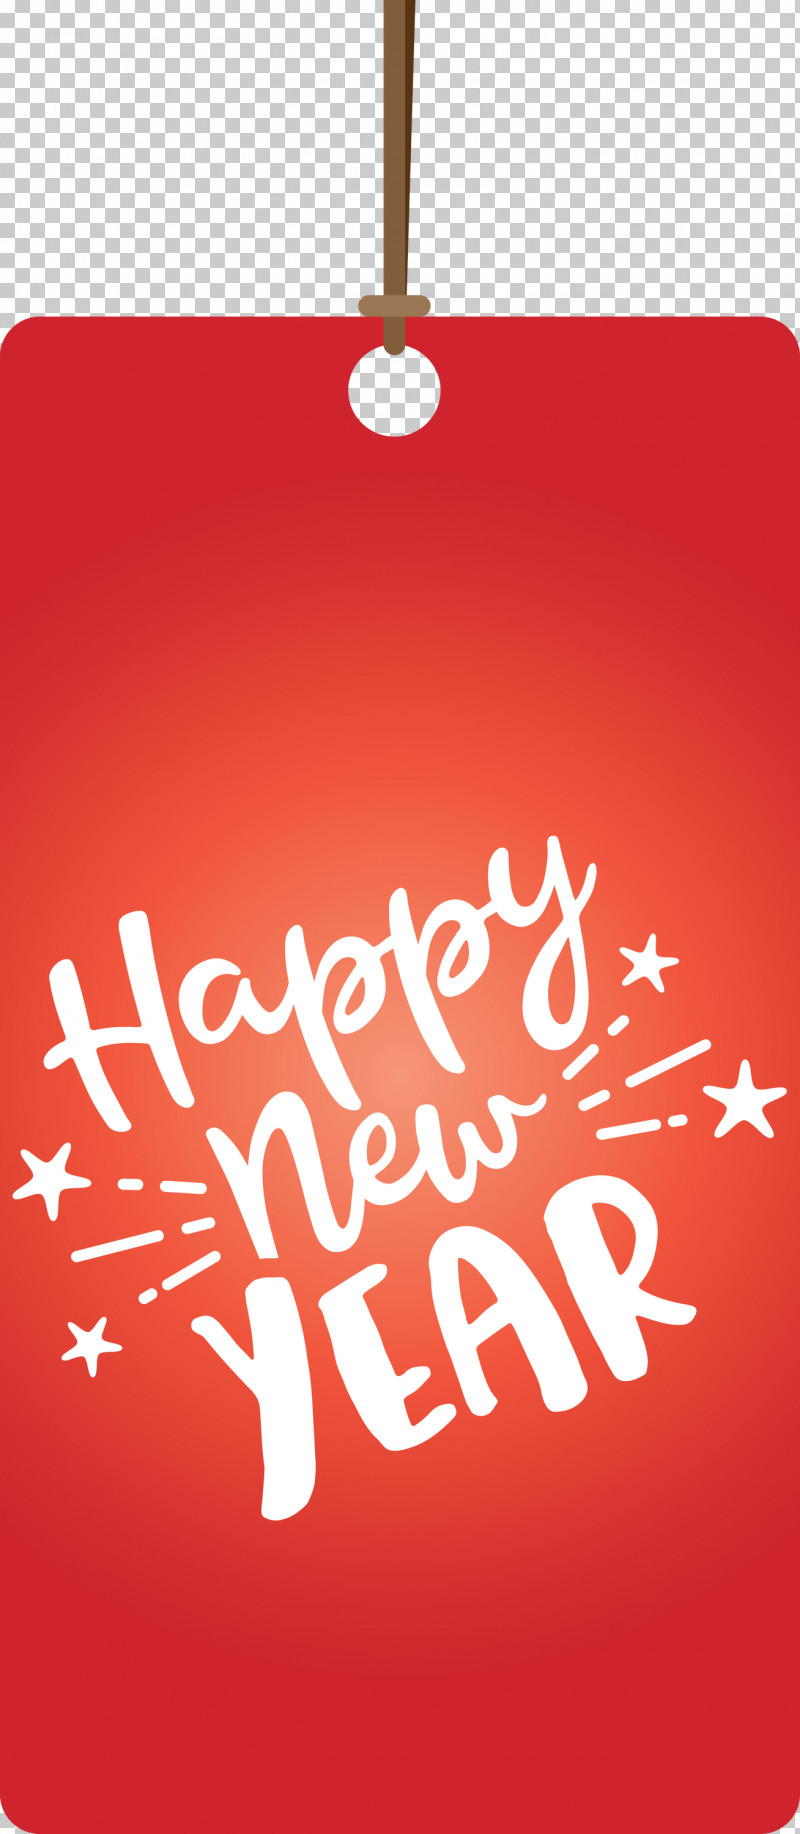 2021 Happy New Year 2021 Happy New Year Tag 2021 New Year PNG, Clipart, 2021 Happy New Year, 2021 Happy New Year Tag, 2021 New Year, Calligraphy, Christmas Day Free PNG Download